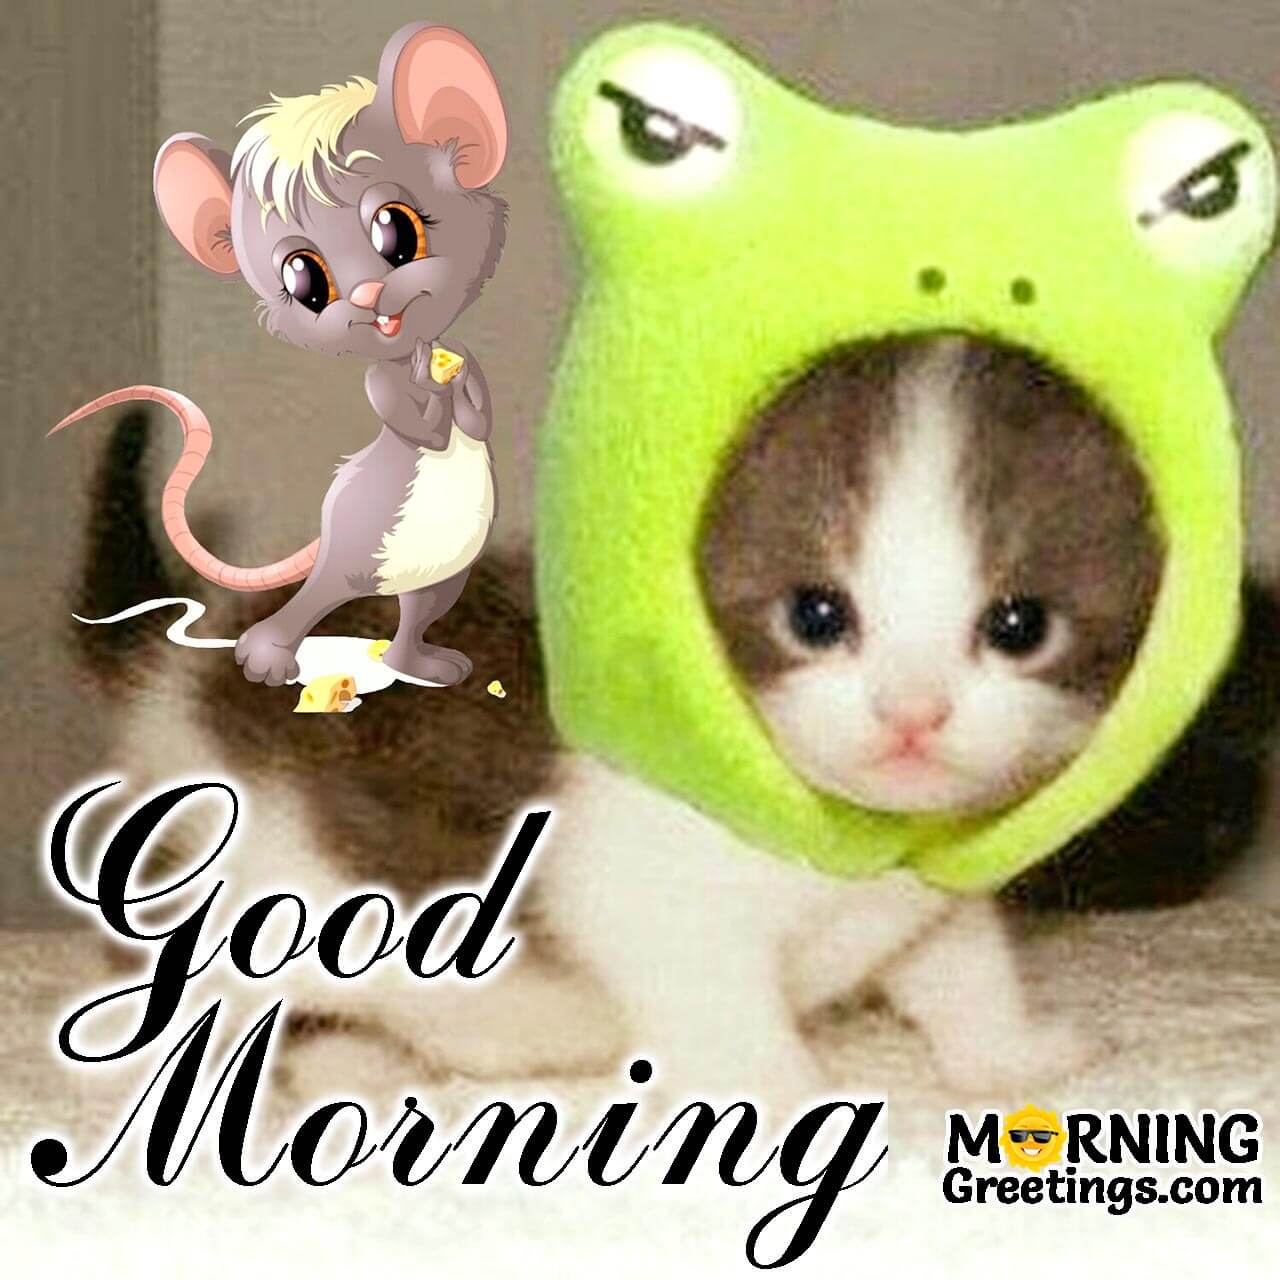 15 Wonderful Morning Wishes For Animal Lovers Morning Greetings